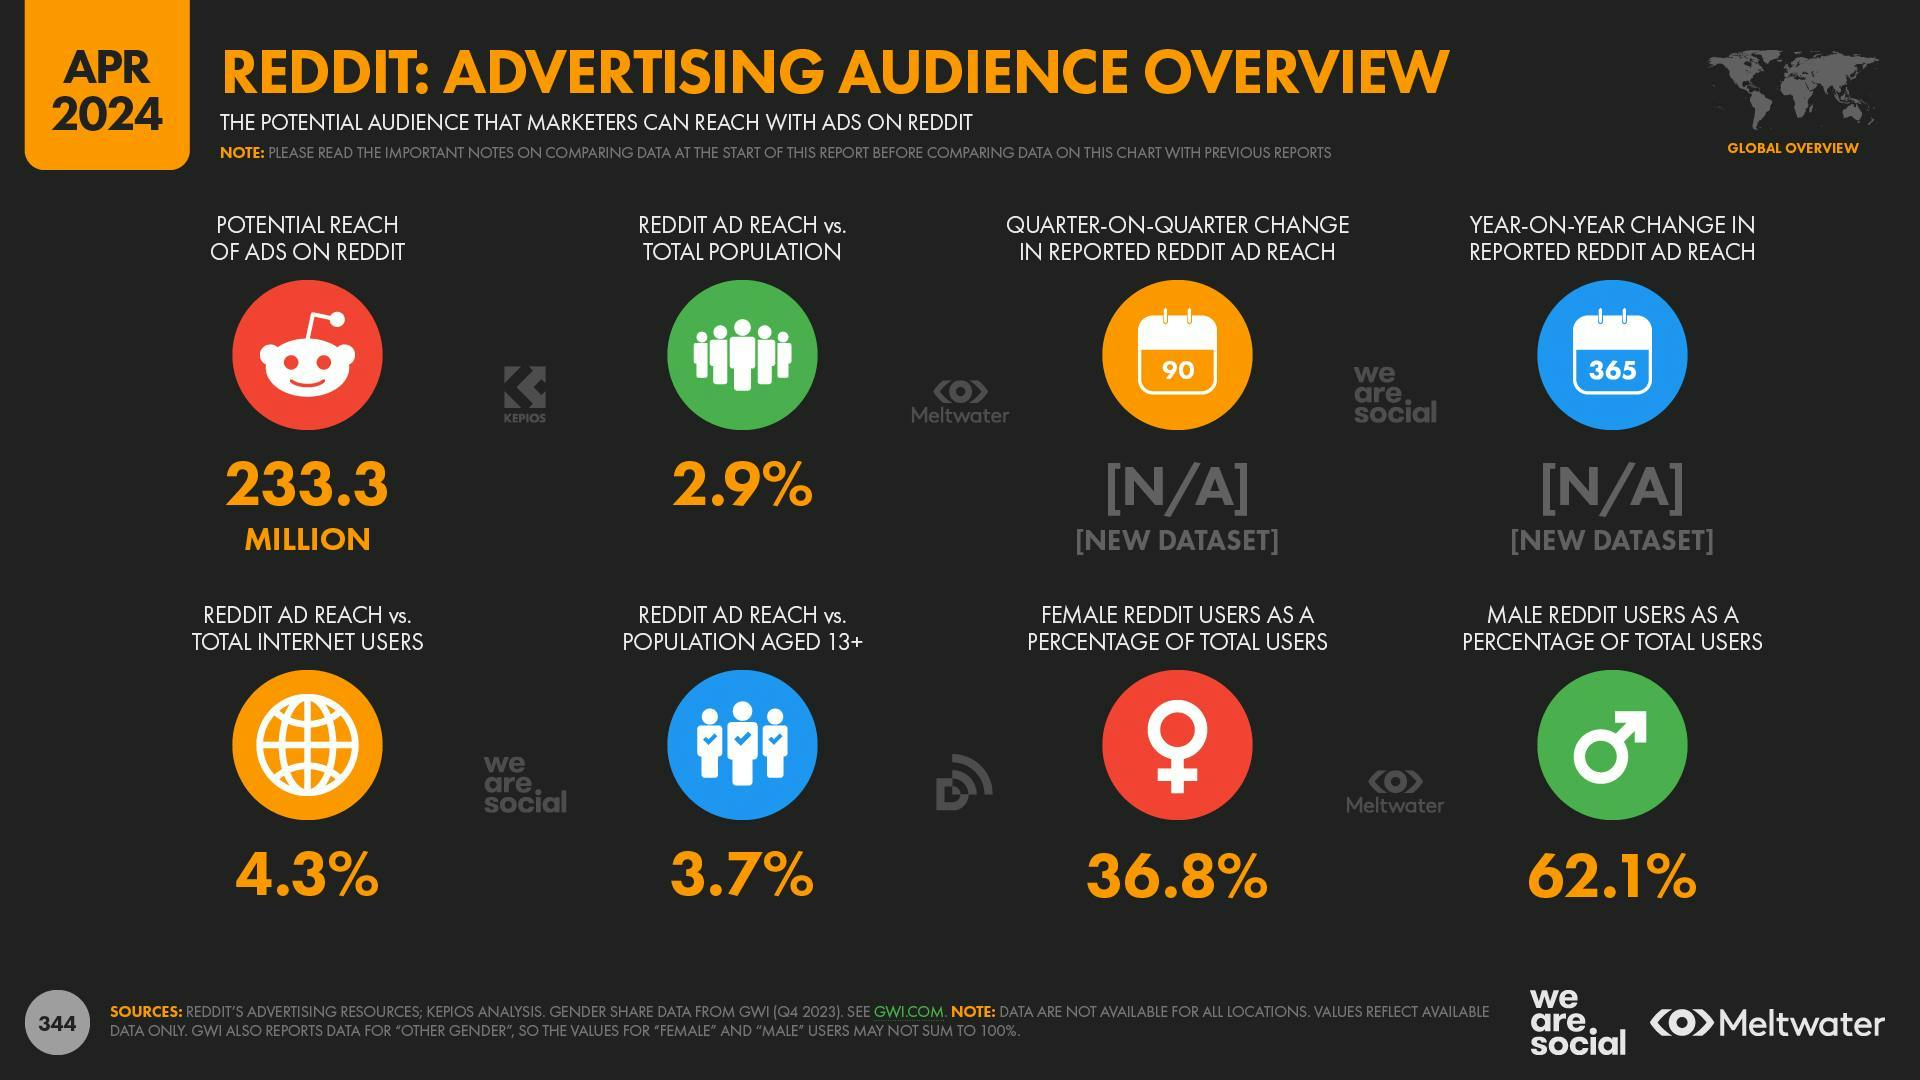 Reddit: Advertising audience overview